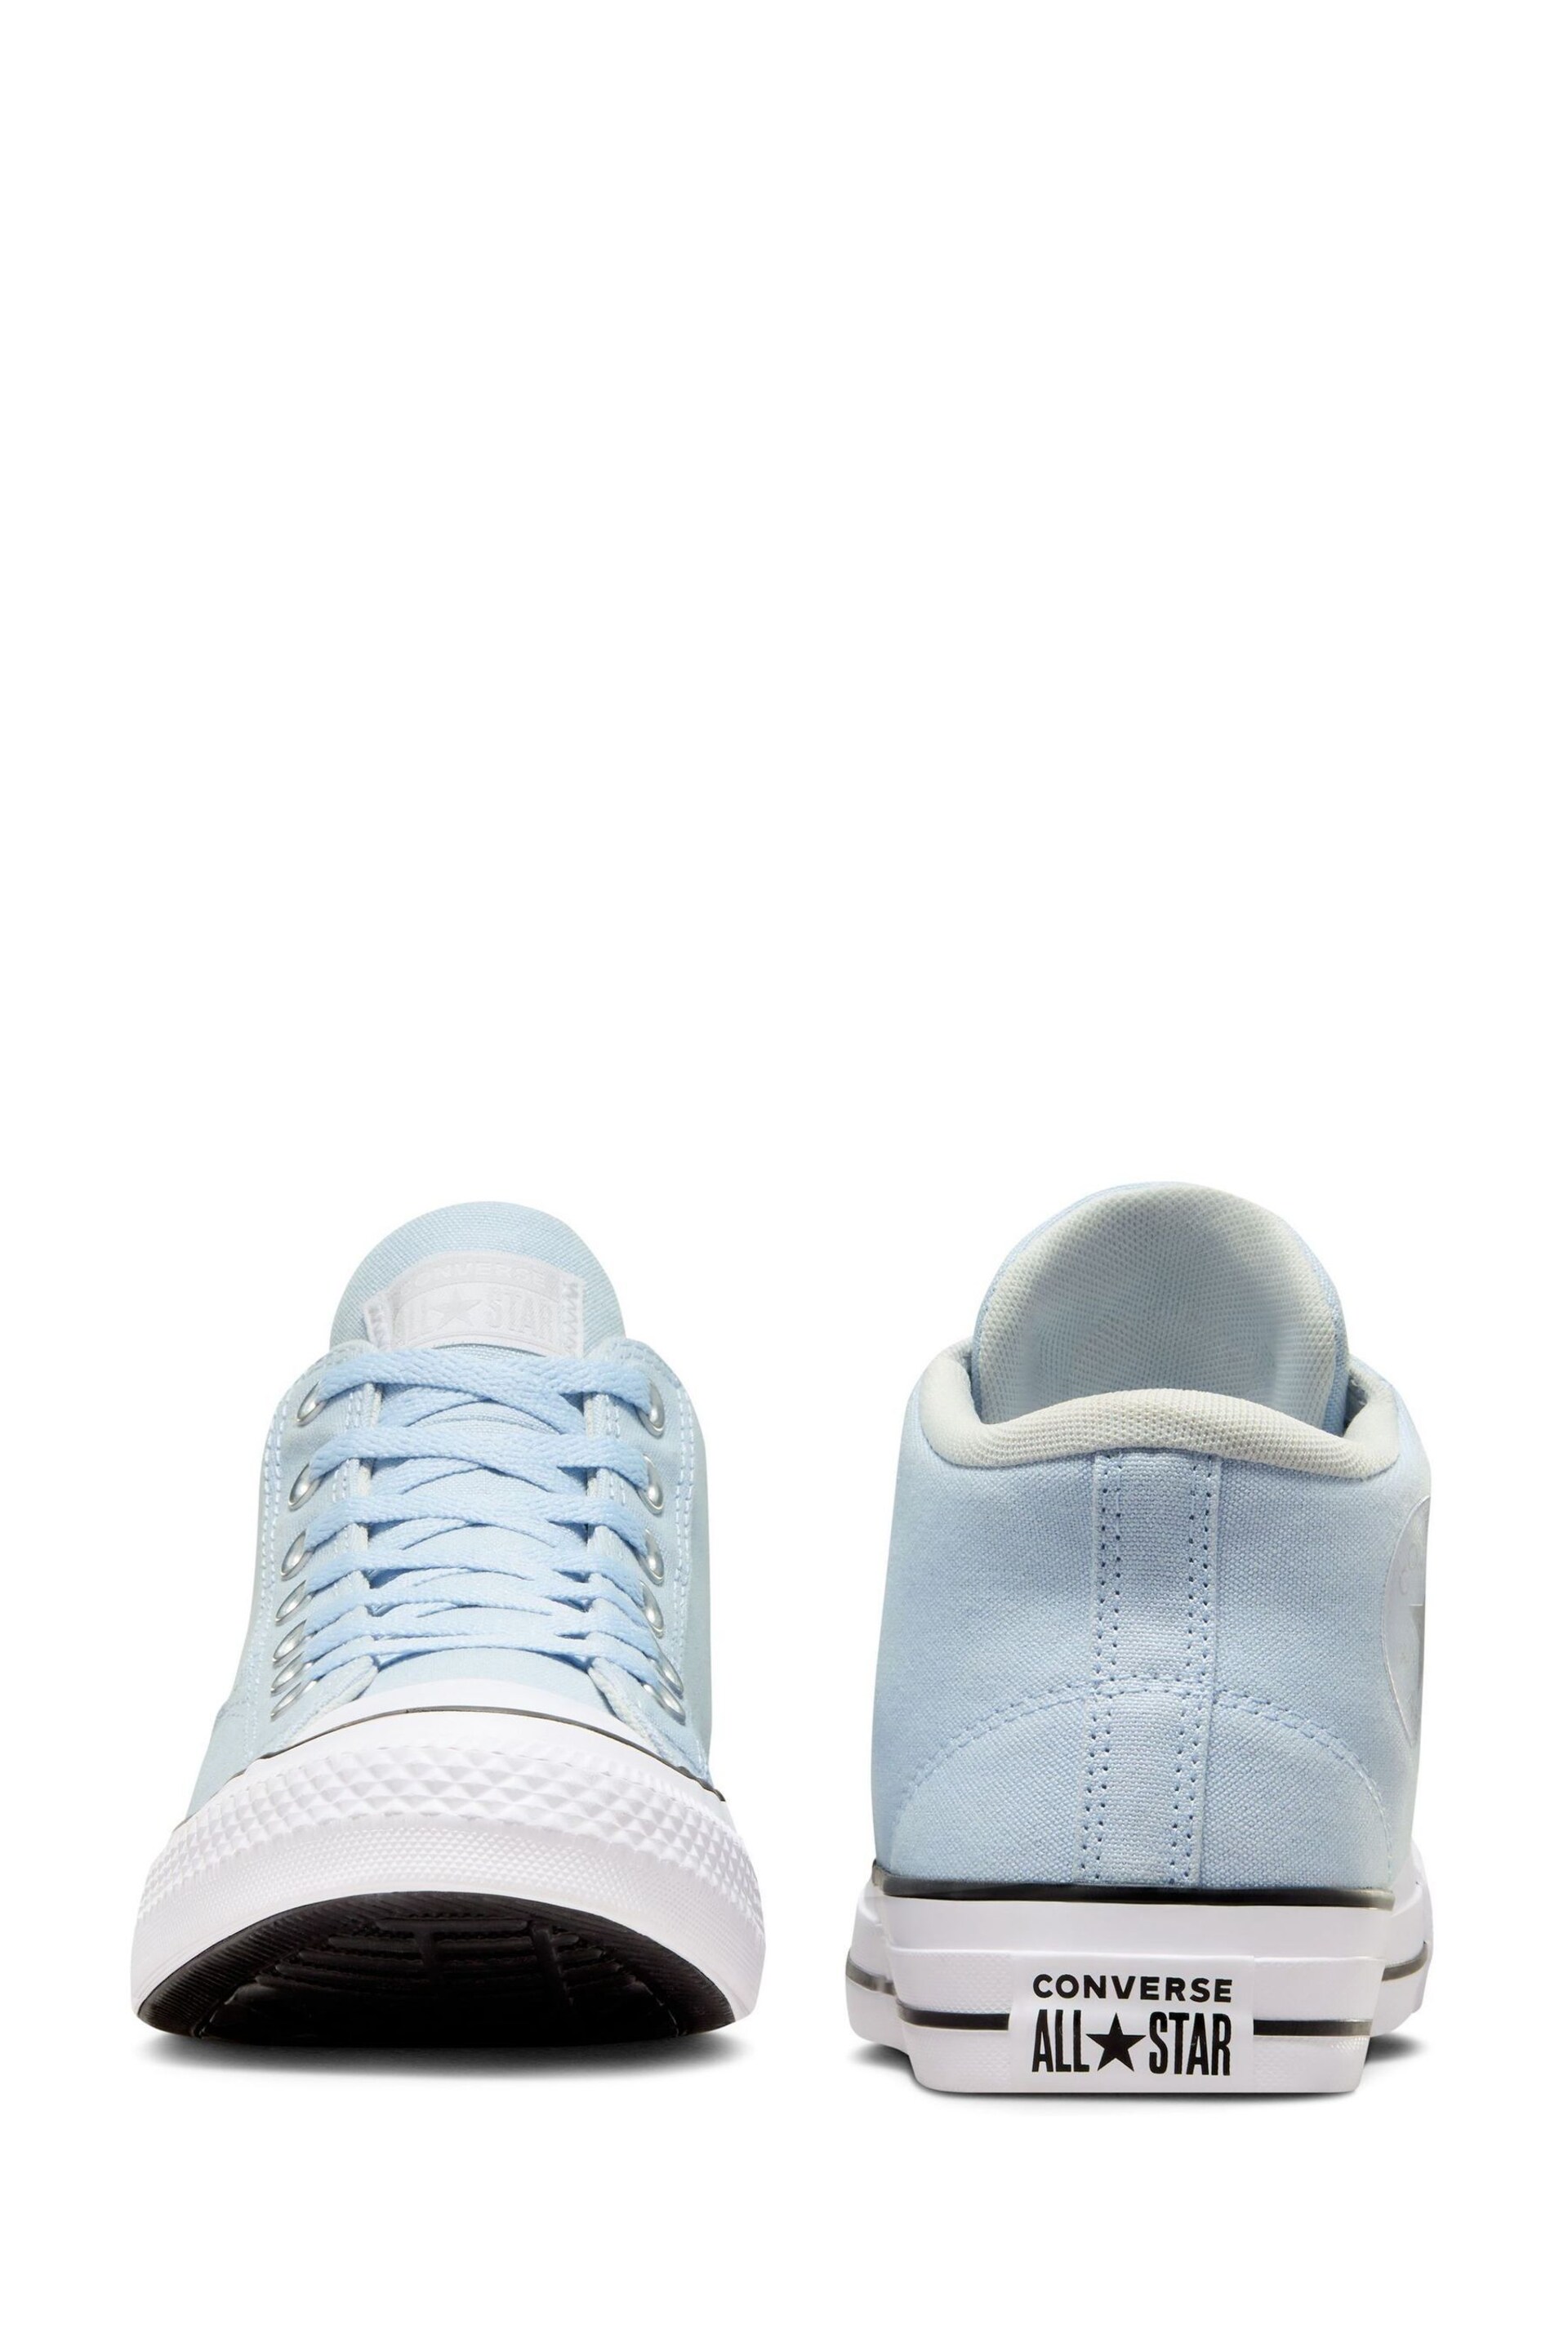 Converse Blue Chuck Taylor All Star Malden Street Trainers - Image 7 of 15